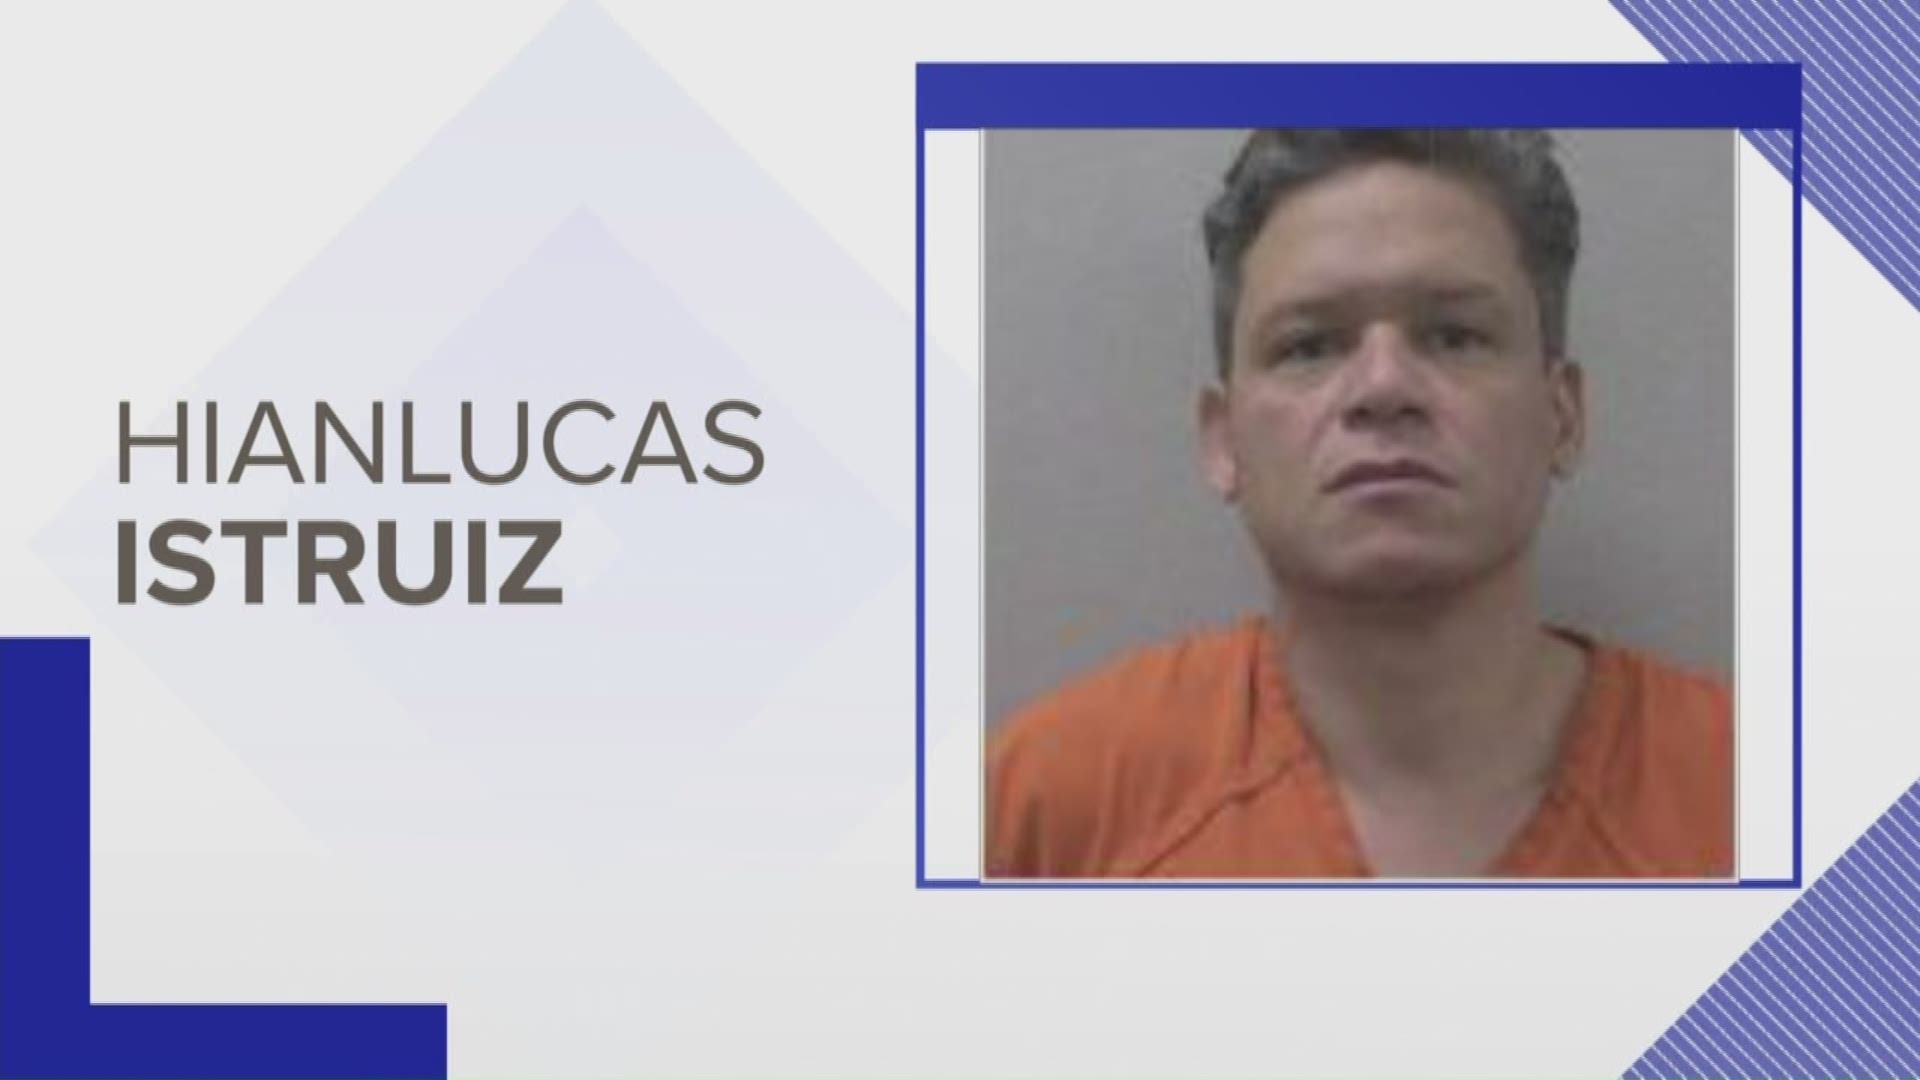 Rodriguez is accused of sexual contact with a Red Bank Elementary School student while on duty at the school in 2016 and 2017.